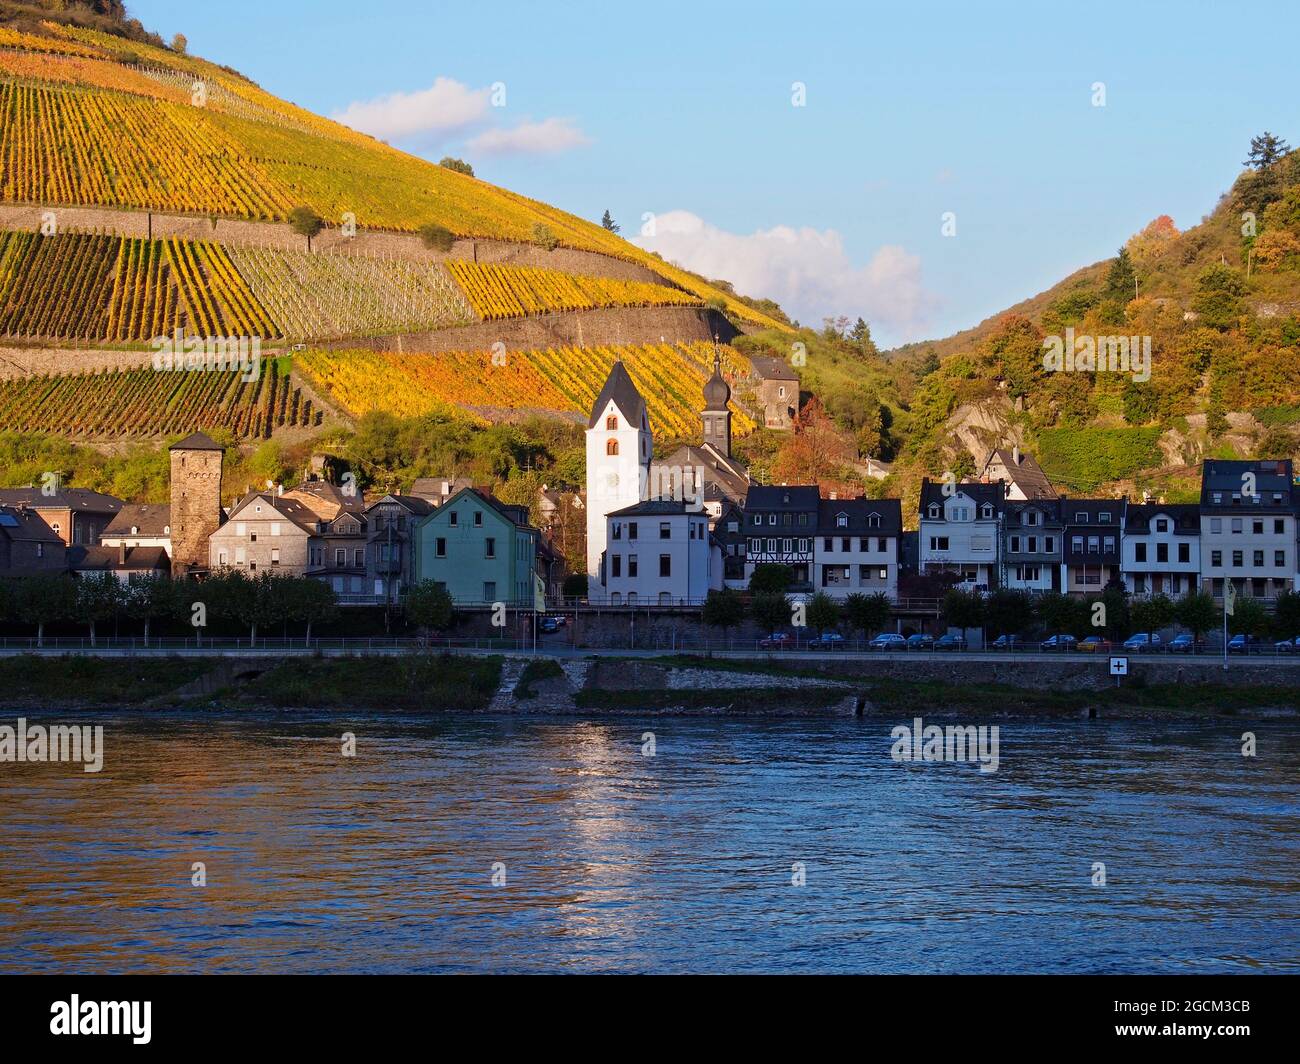 The town of Pfalzgrafenstein overlooked by a Castle on the Rhine River in Germany taken from cruise ship Stock Photo